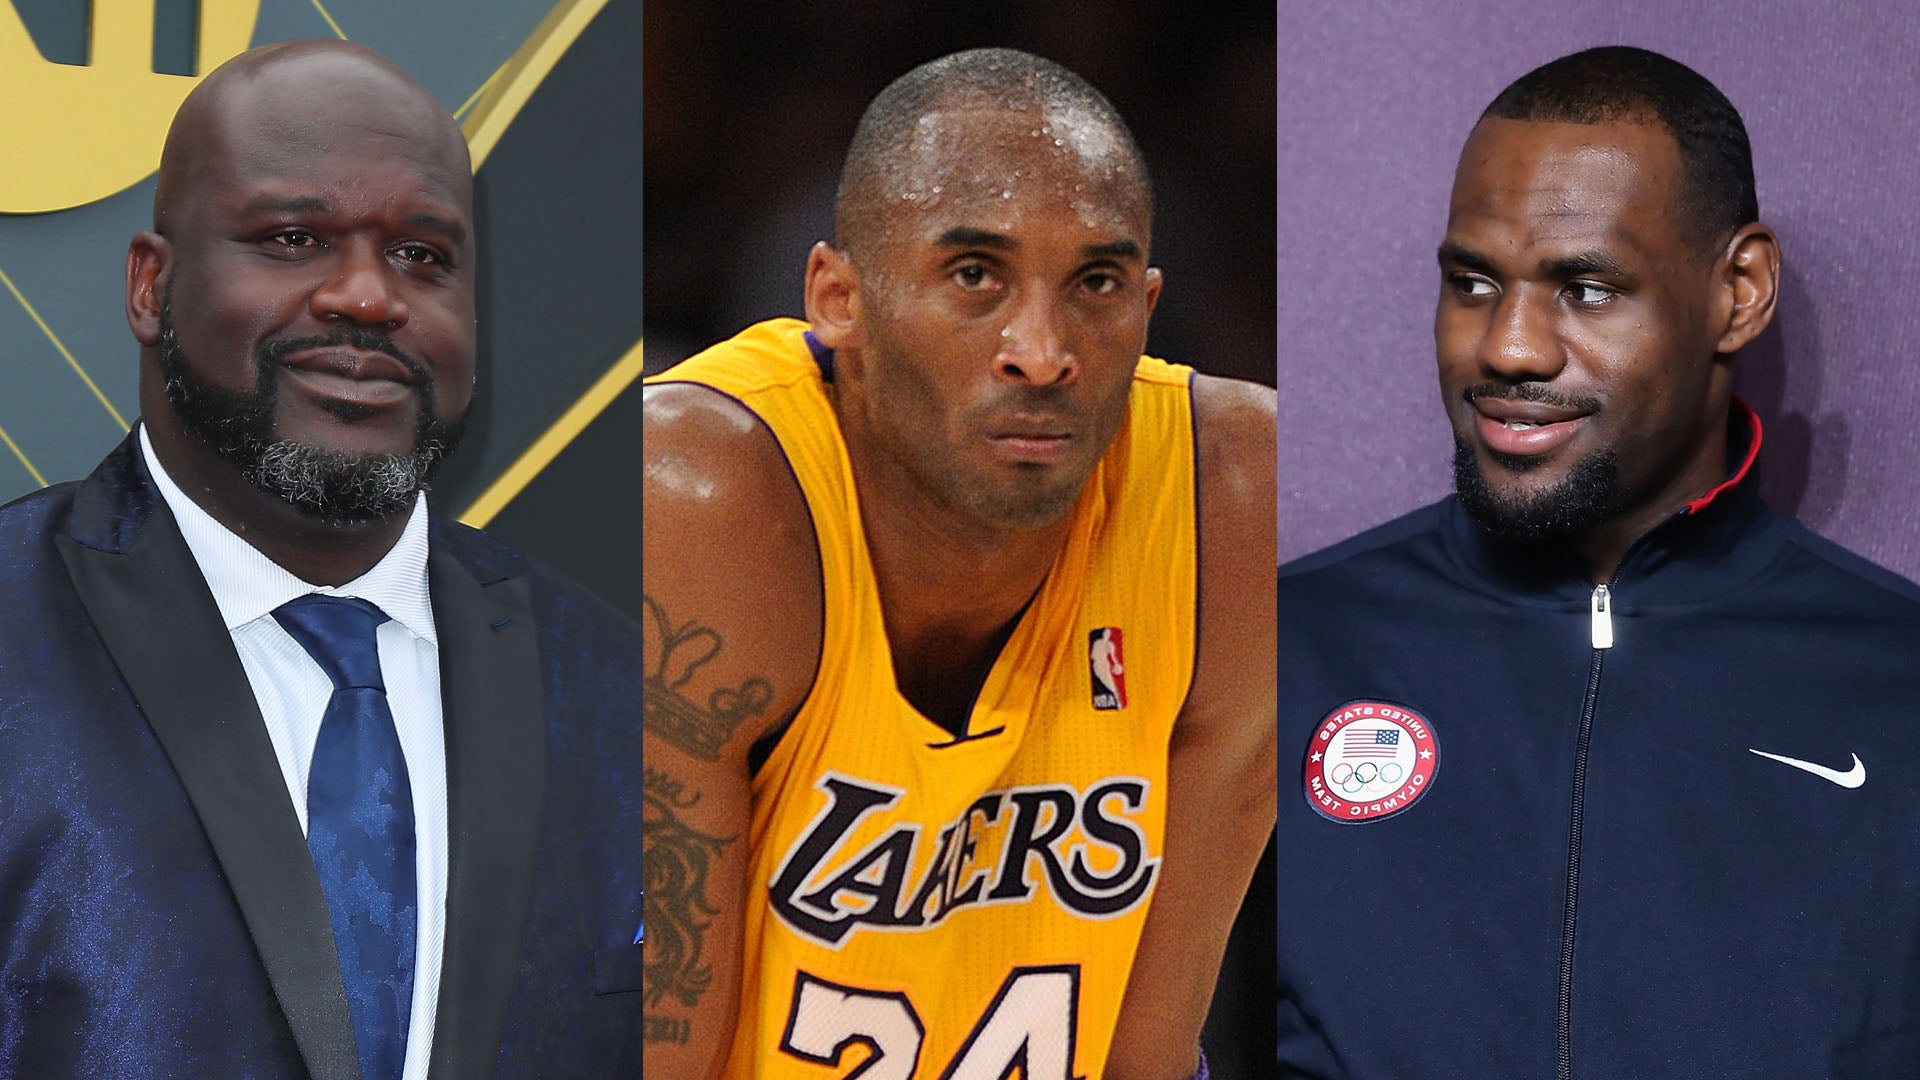 Shaquille O'Neal on his regret over Kobe Bryant: So much left unsaid